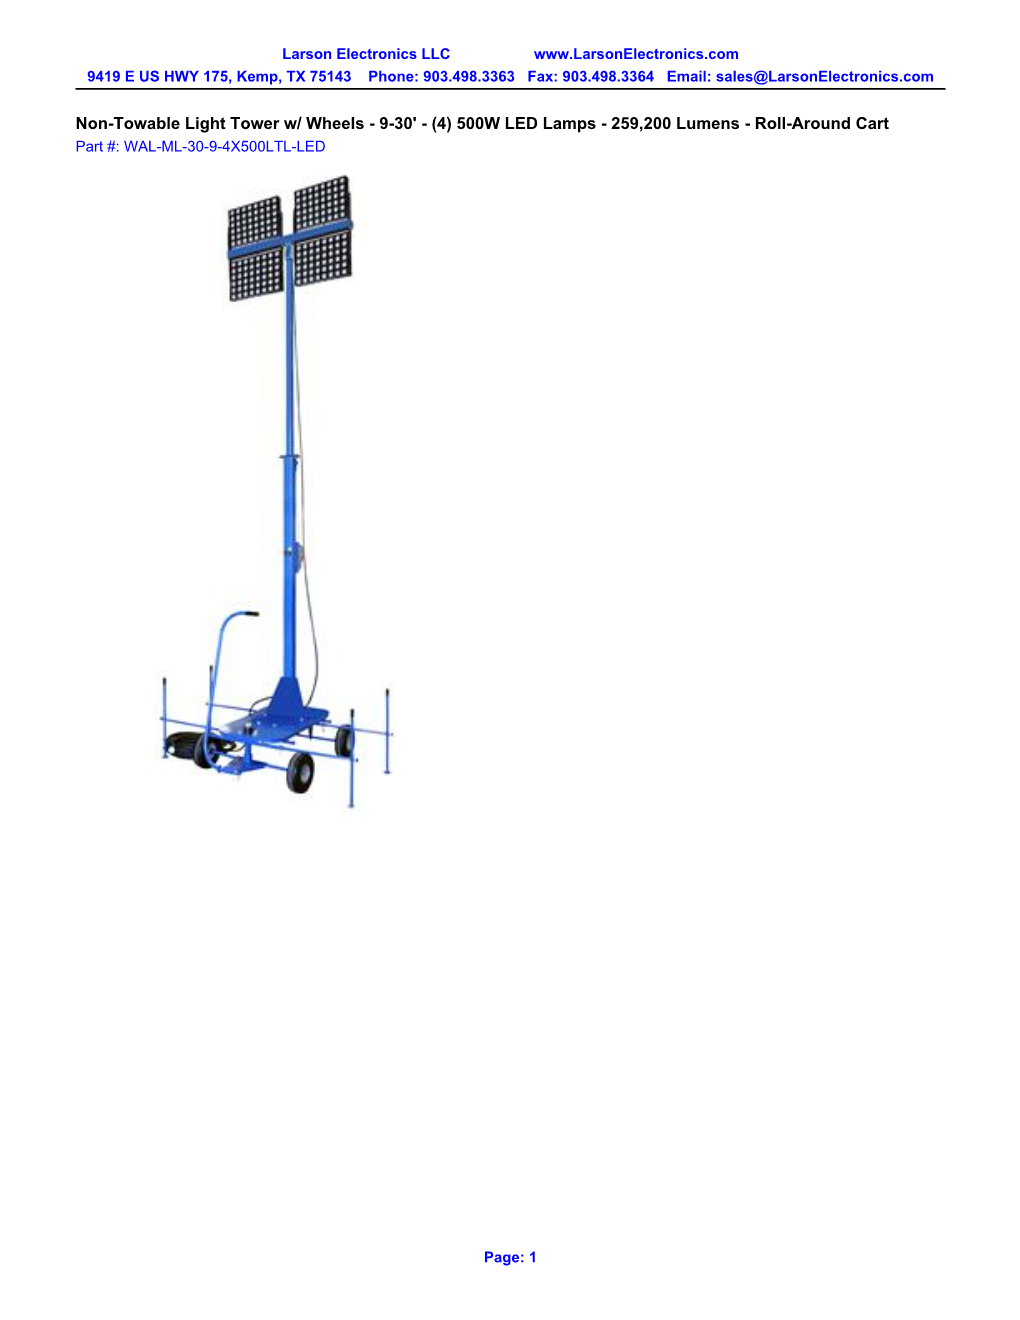 Non-Towable Light Tower W/ Wheels - 9-30' - (4) 500W LED Lamps - 259,200 Lumens - Roll-Around Cart Part #: WAL-ML-30-9-4X500LTL-LED